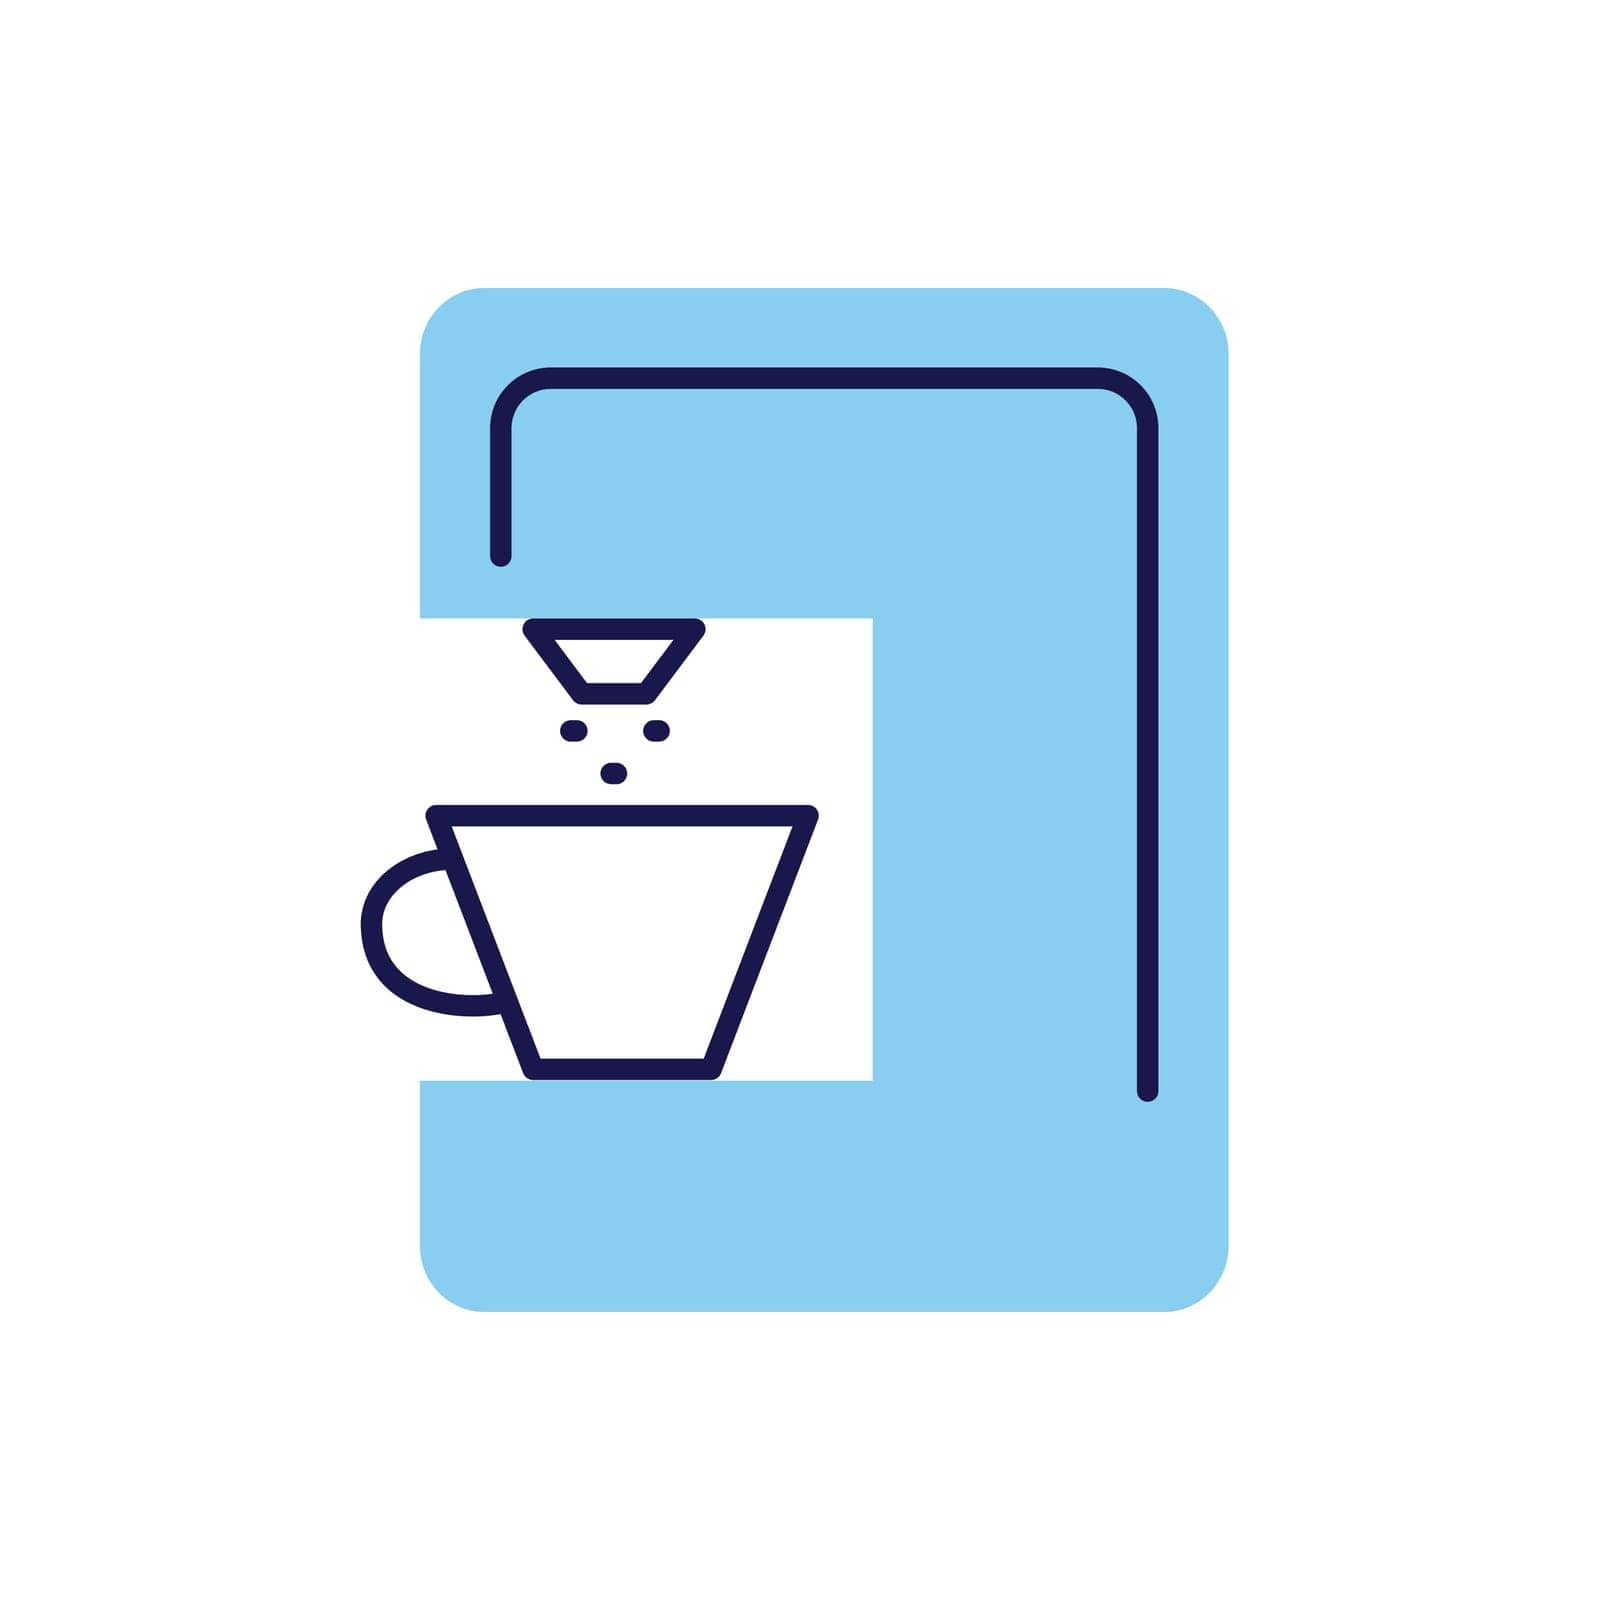 Coffee Maker related vector icon by smoki